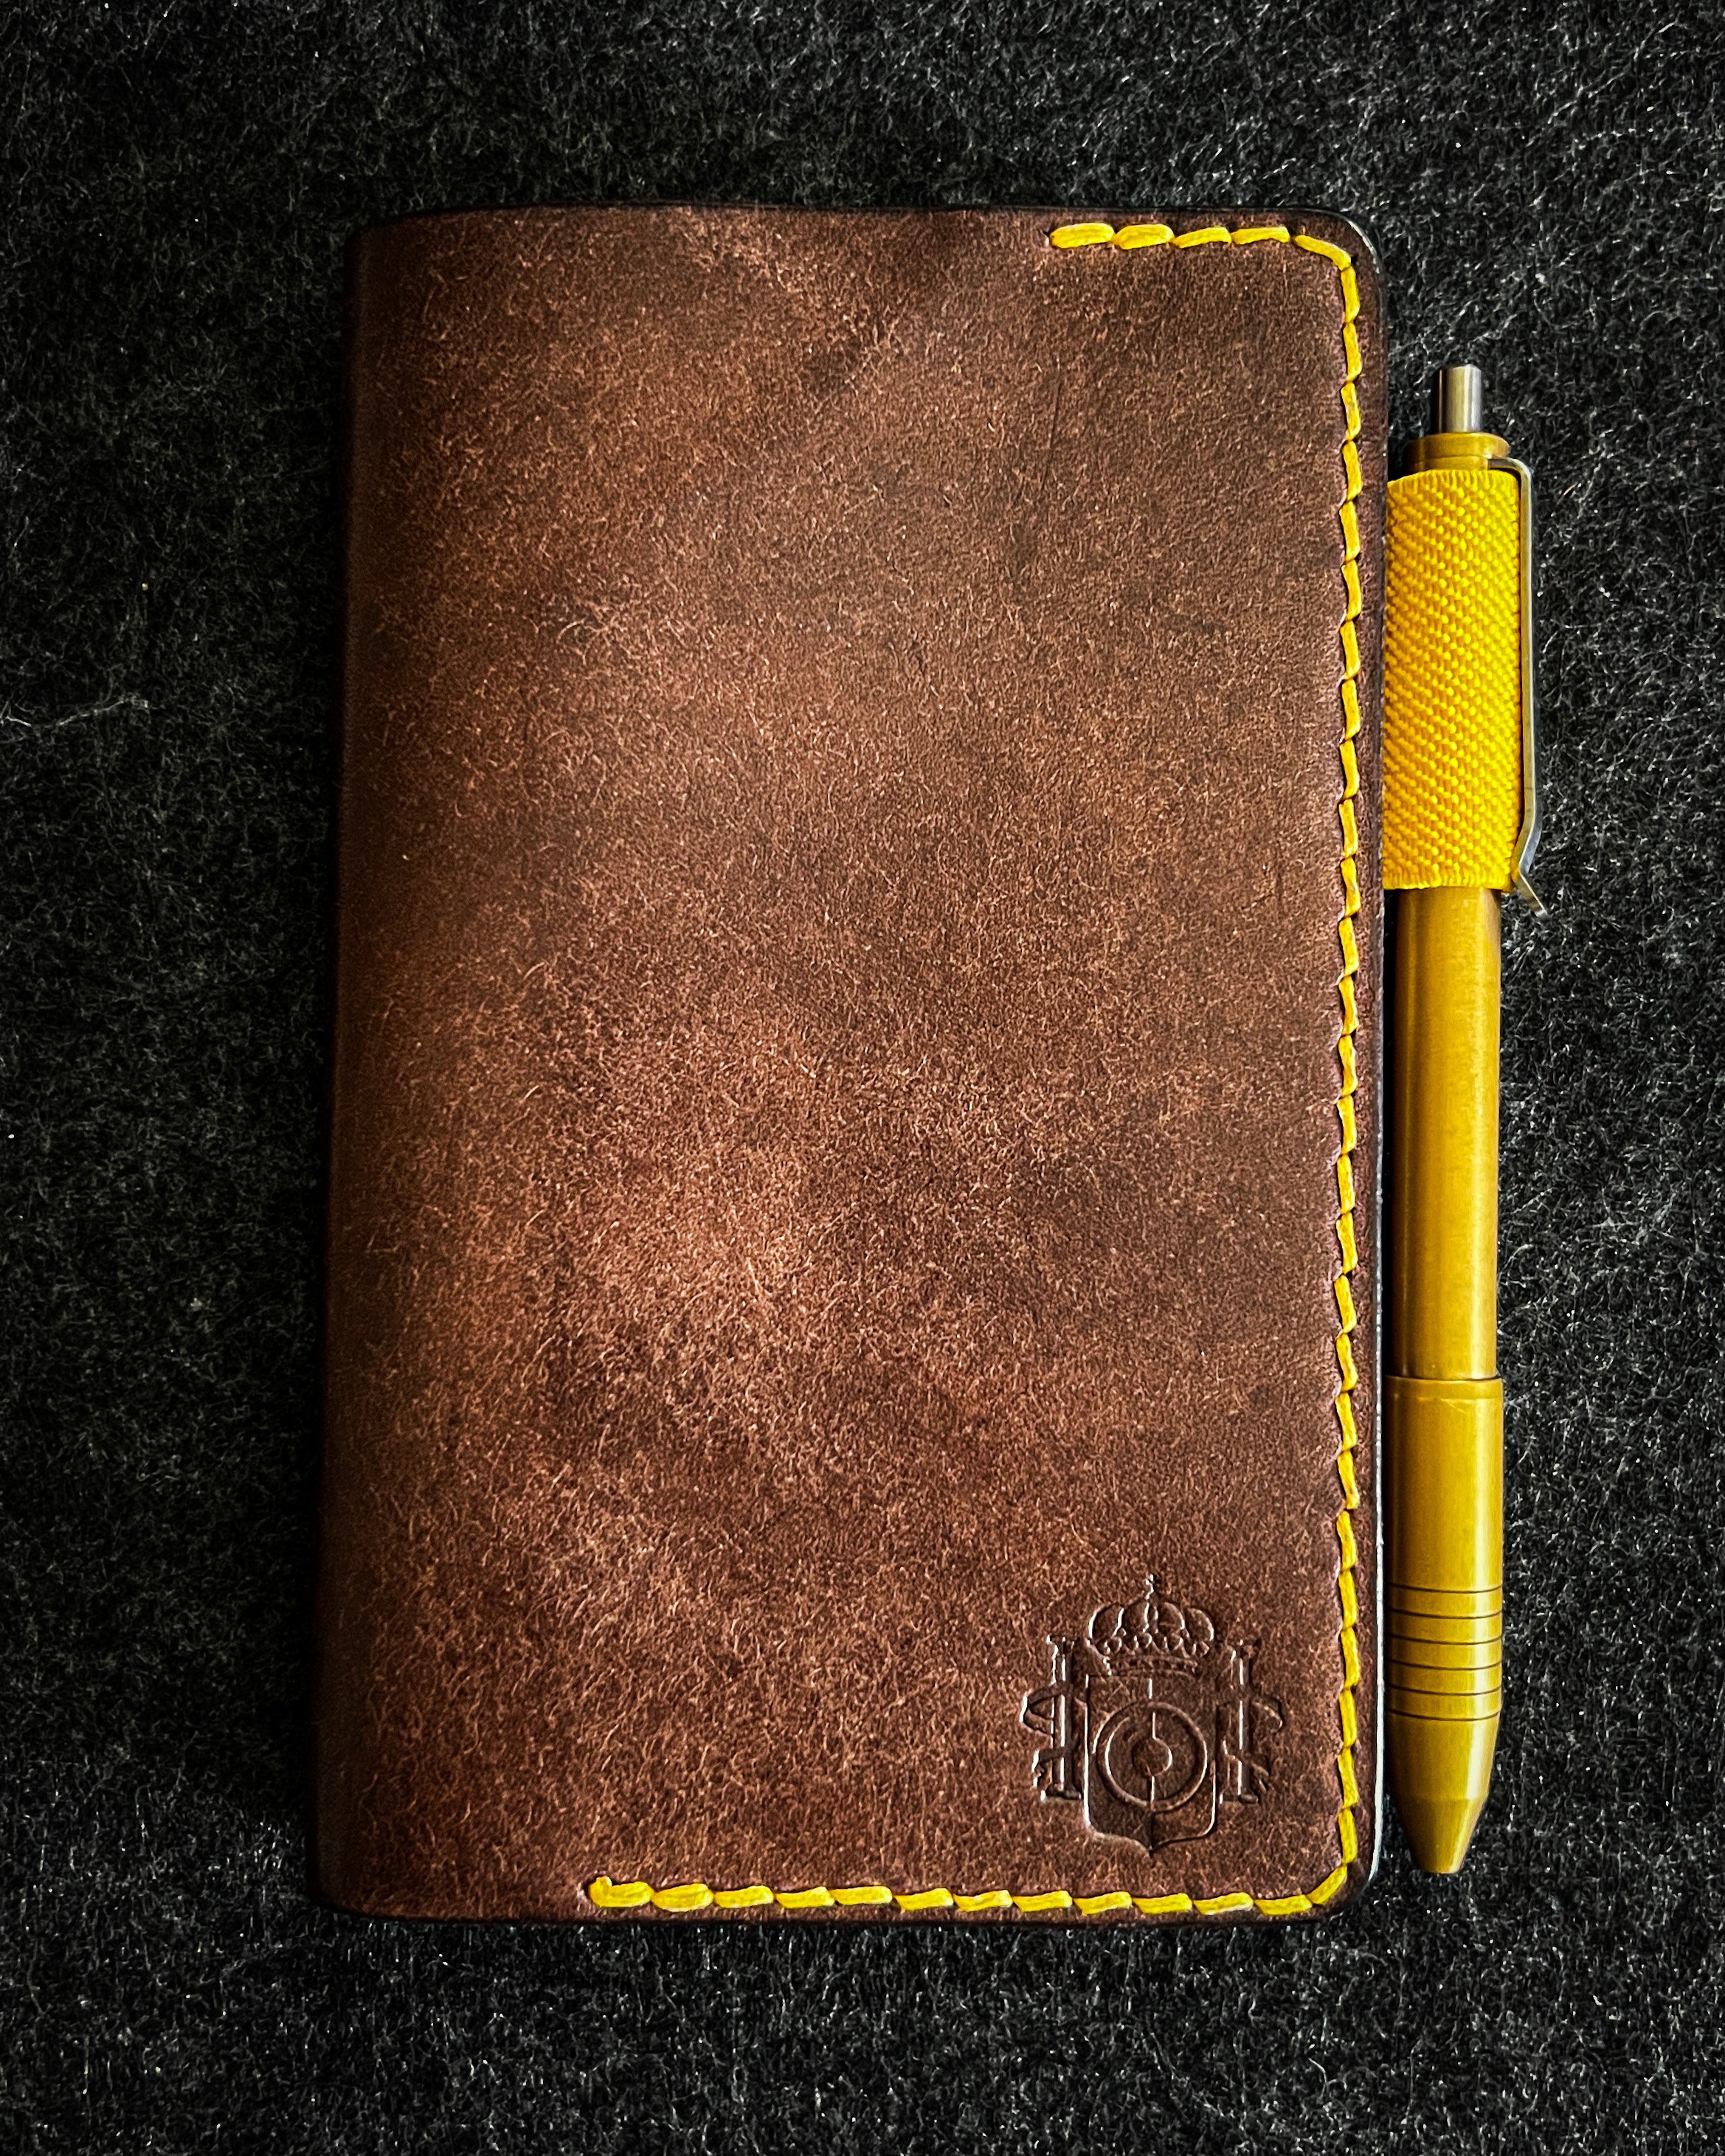 Field Notes Pocket Notebook - Narrow Gate Leather Goods